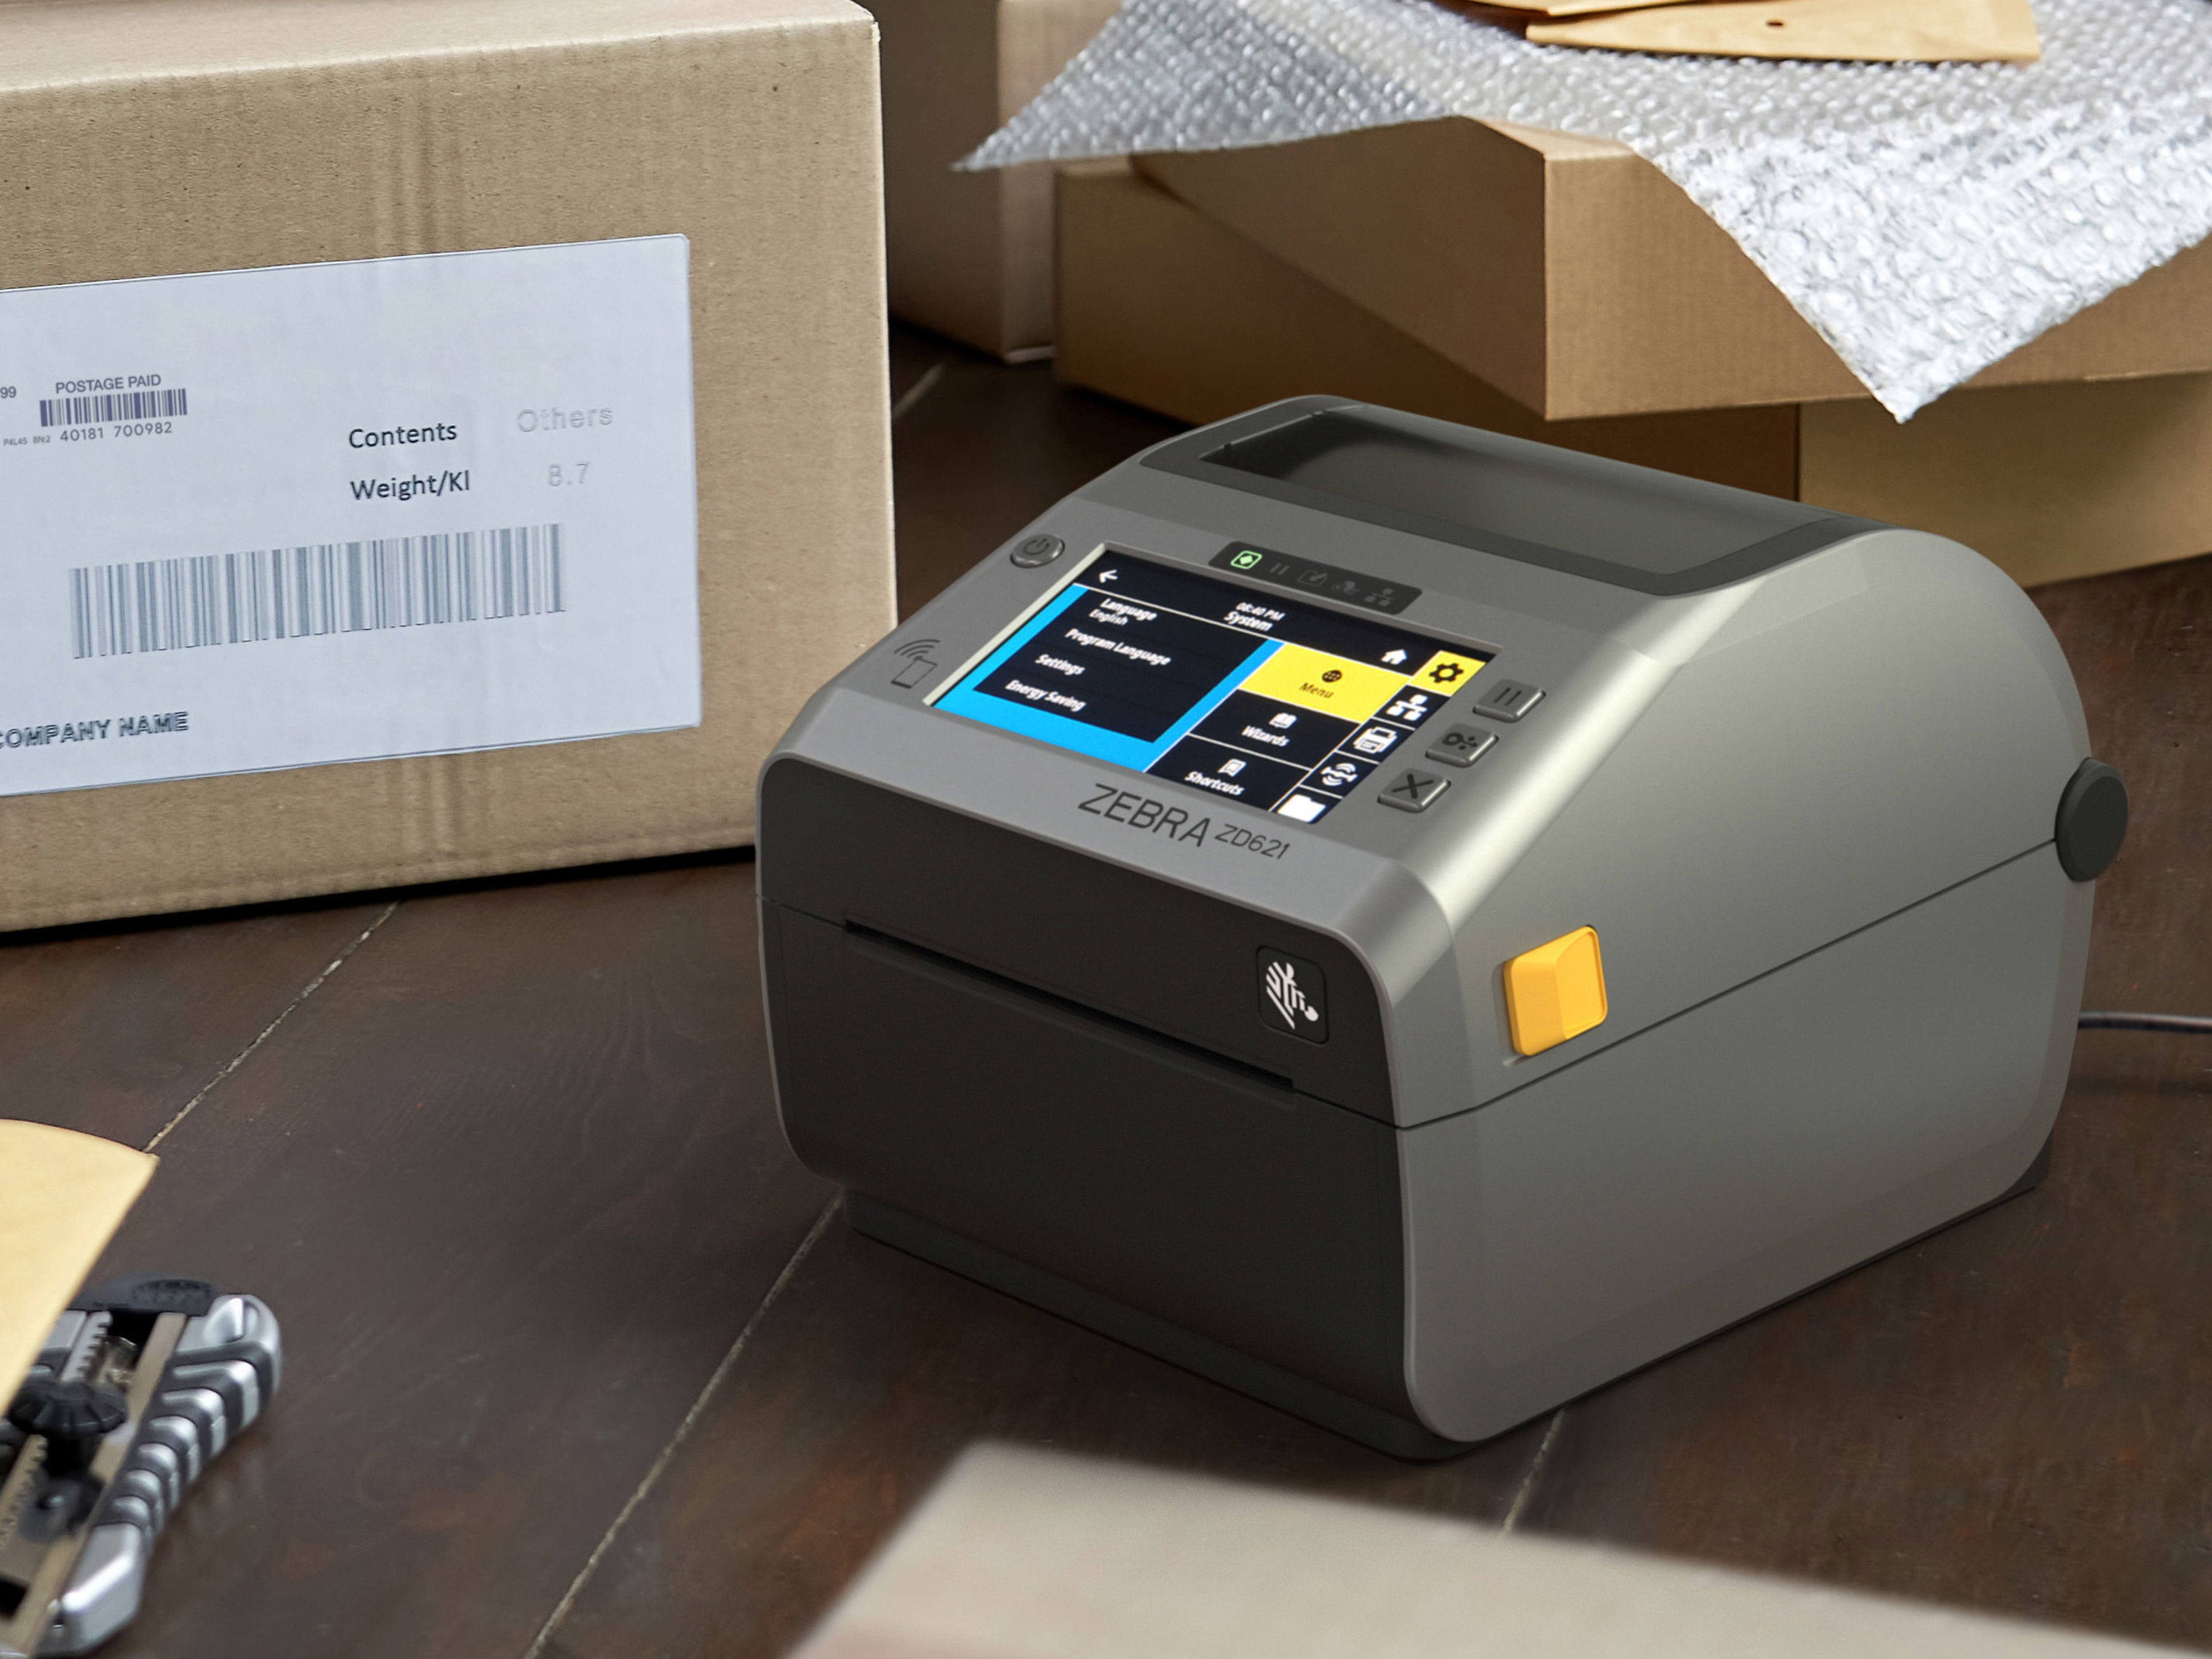 Front left view of a Zebra ZD621 desktop printer in a packing environment, showcasing its application and functionality including label printing.